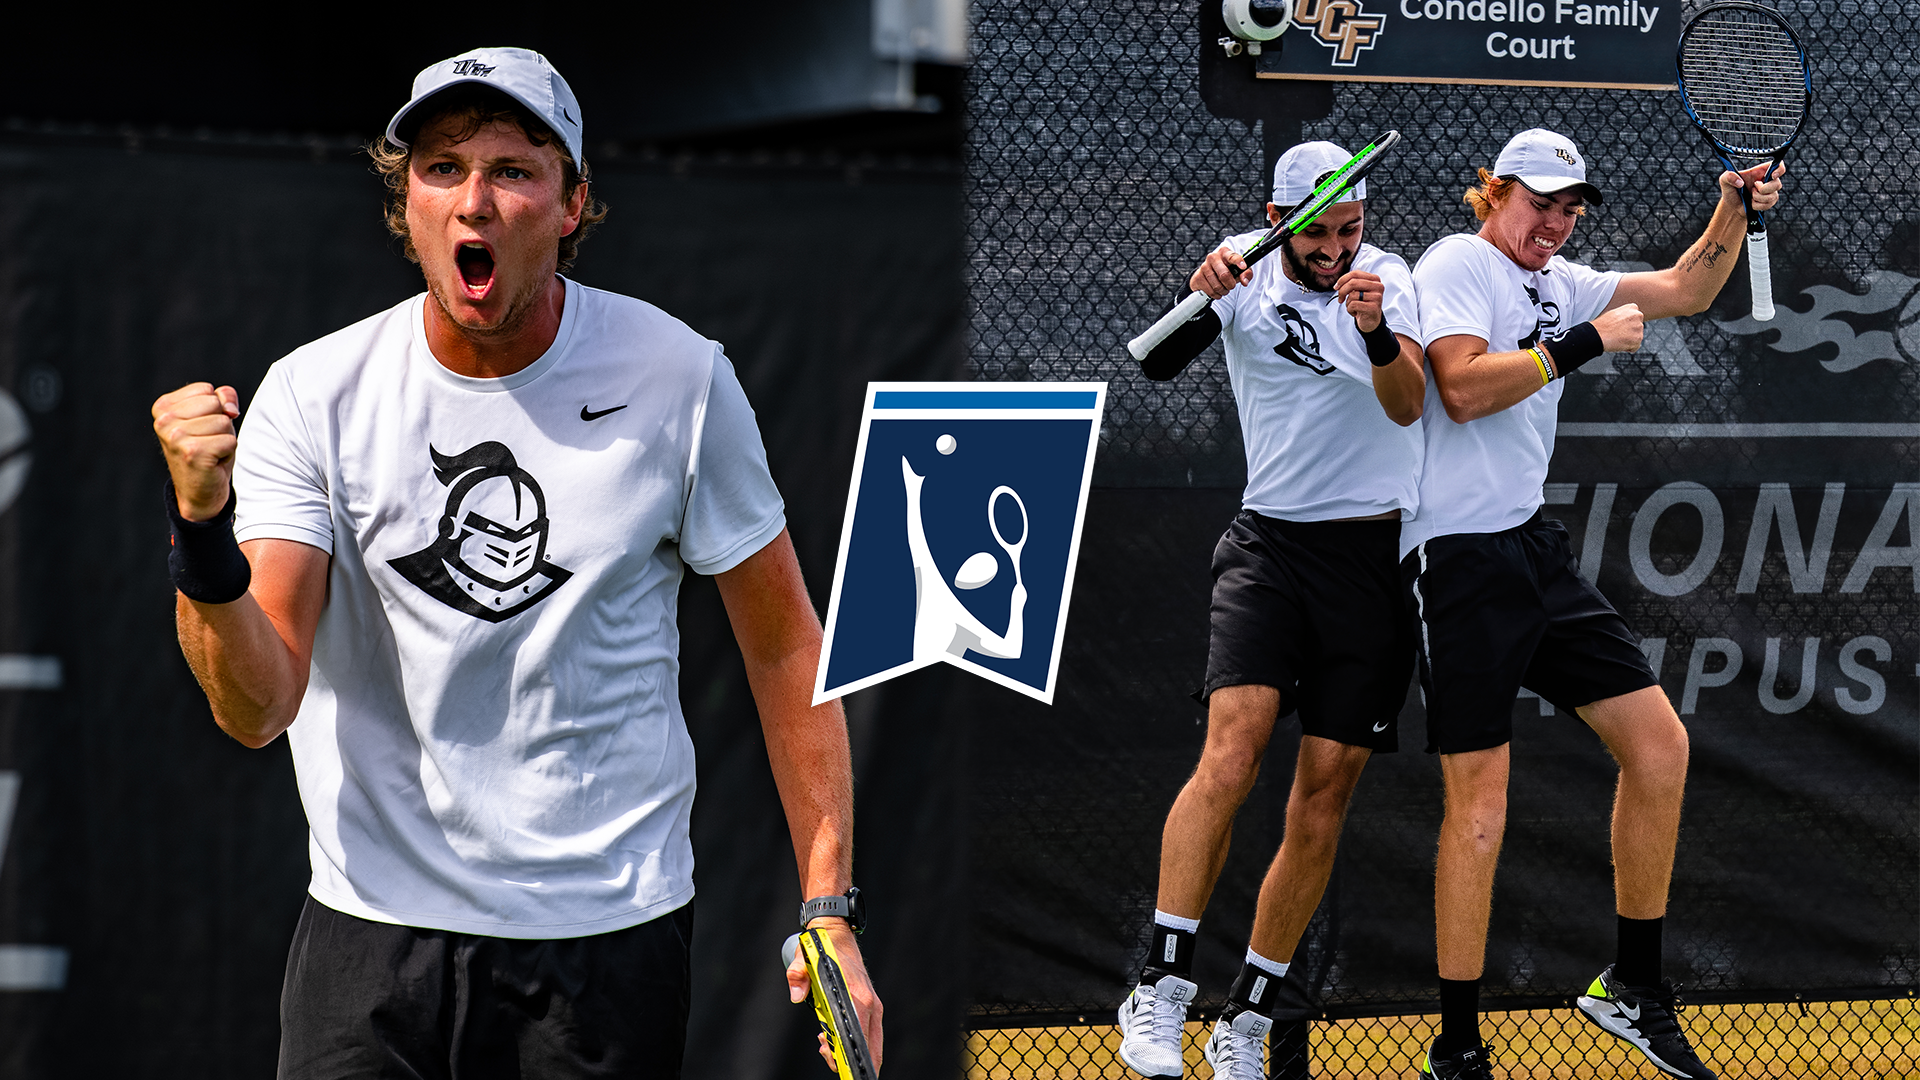 Trio of Knights Set for Singles and Doubles Championships - UCF Athletics